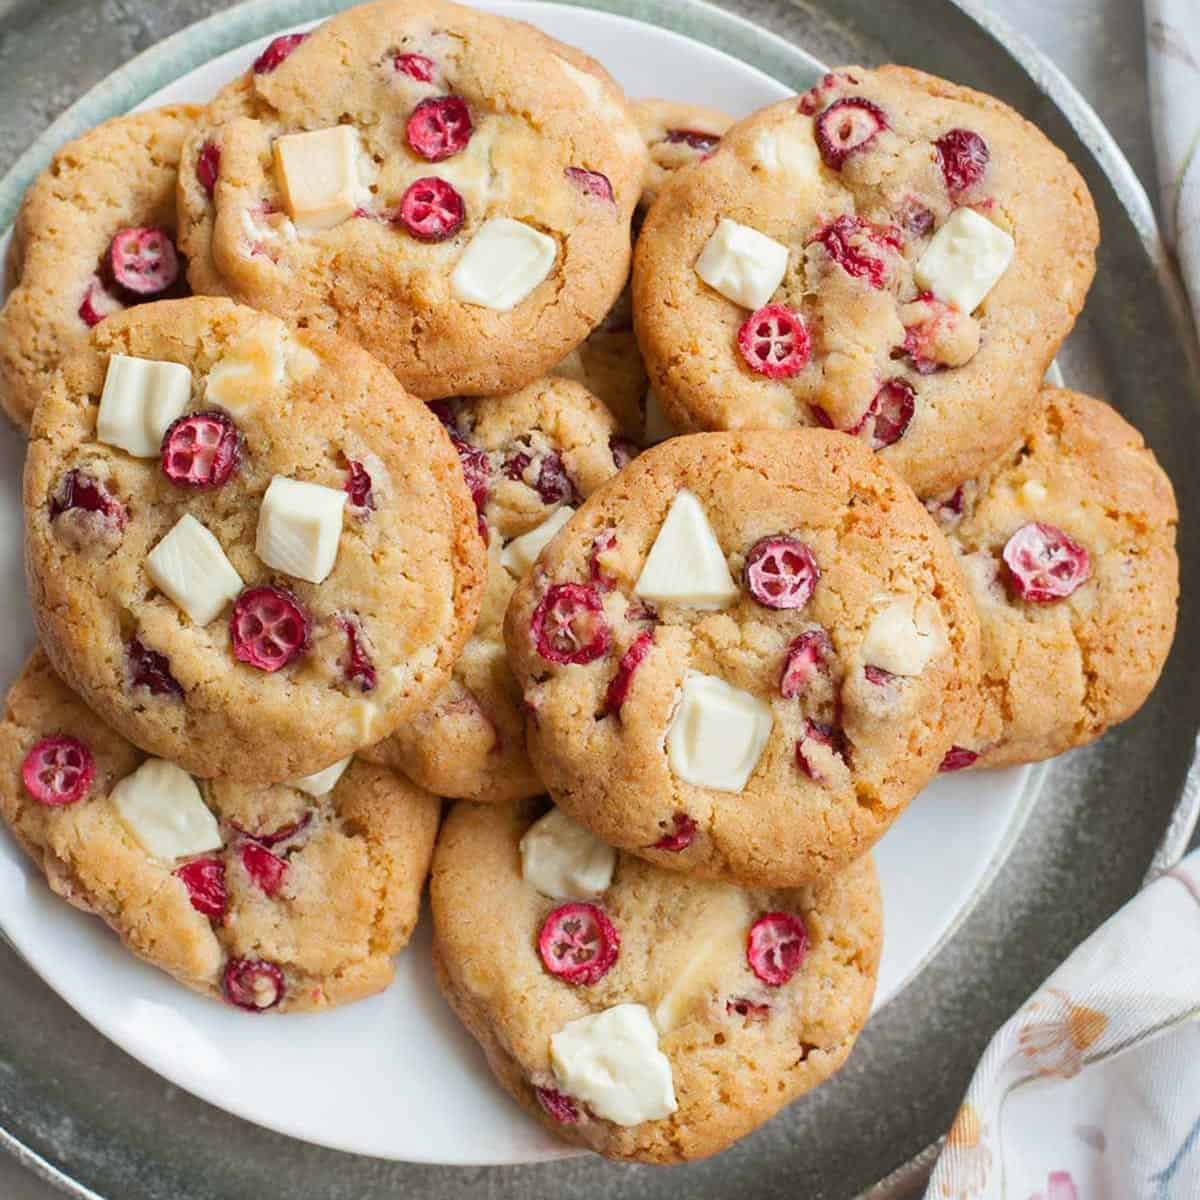 A plate of raspberry and white chocolate cookies.